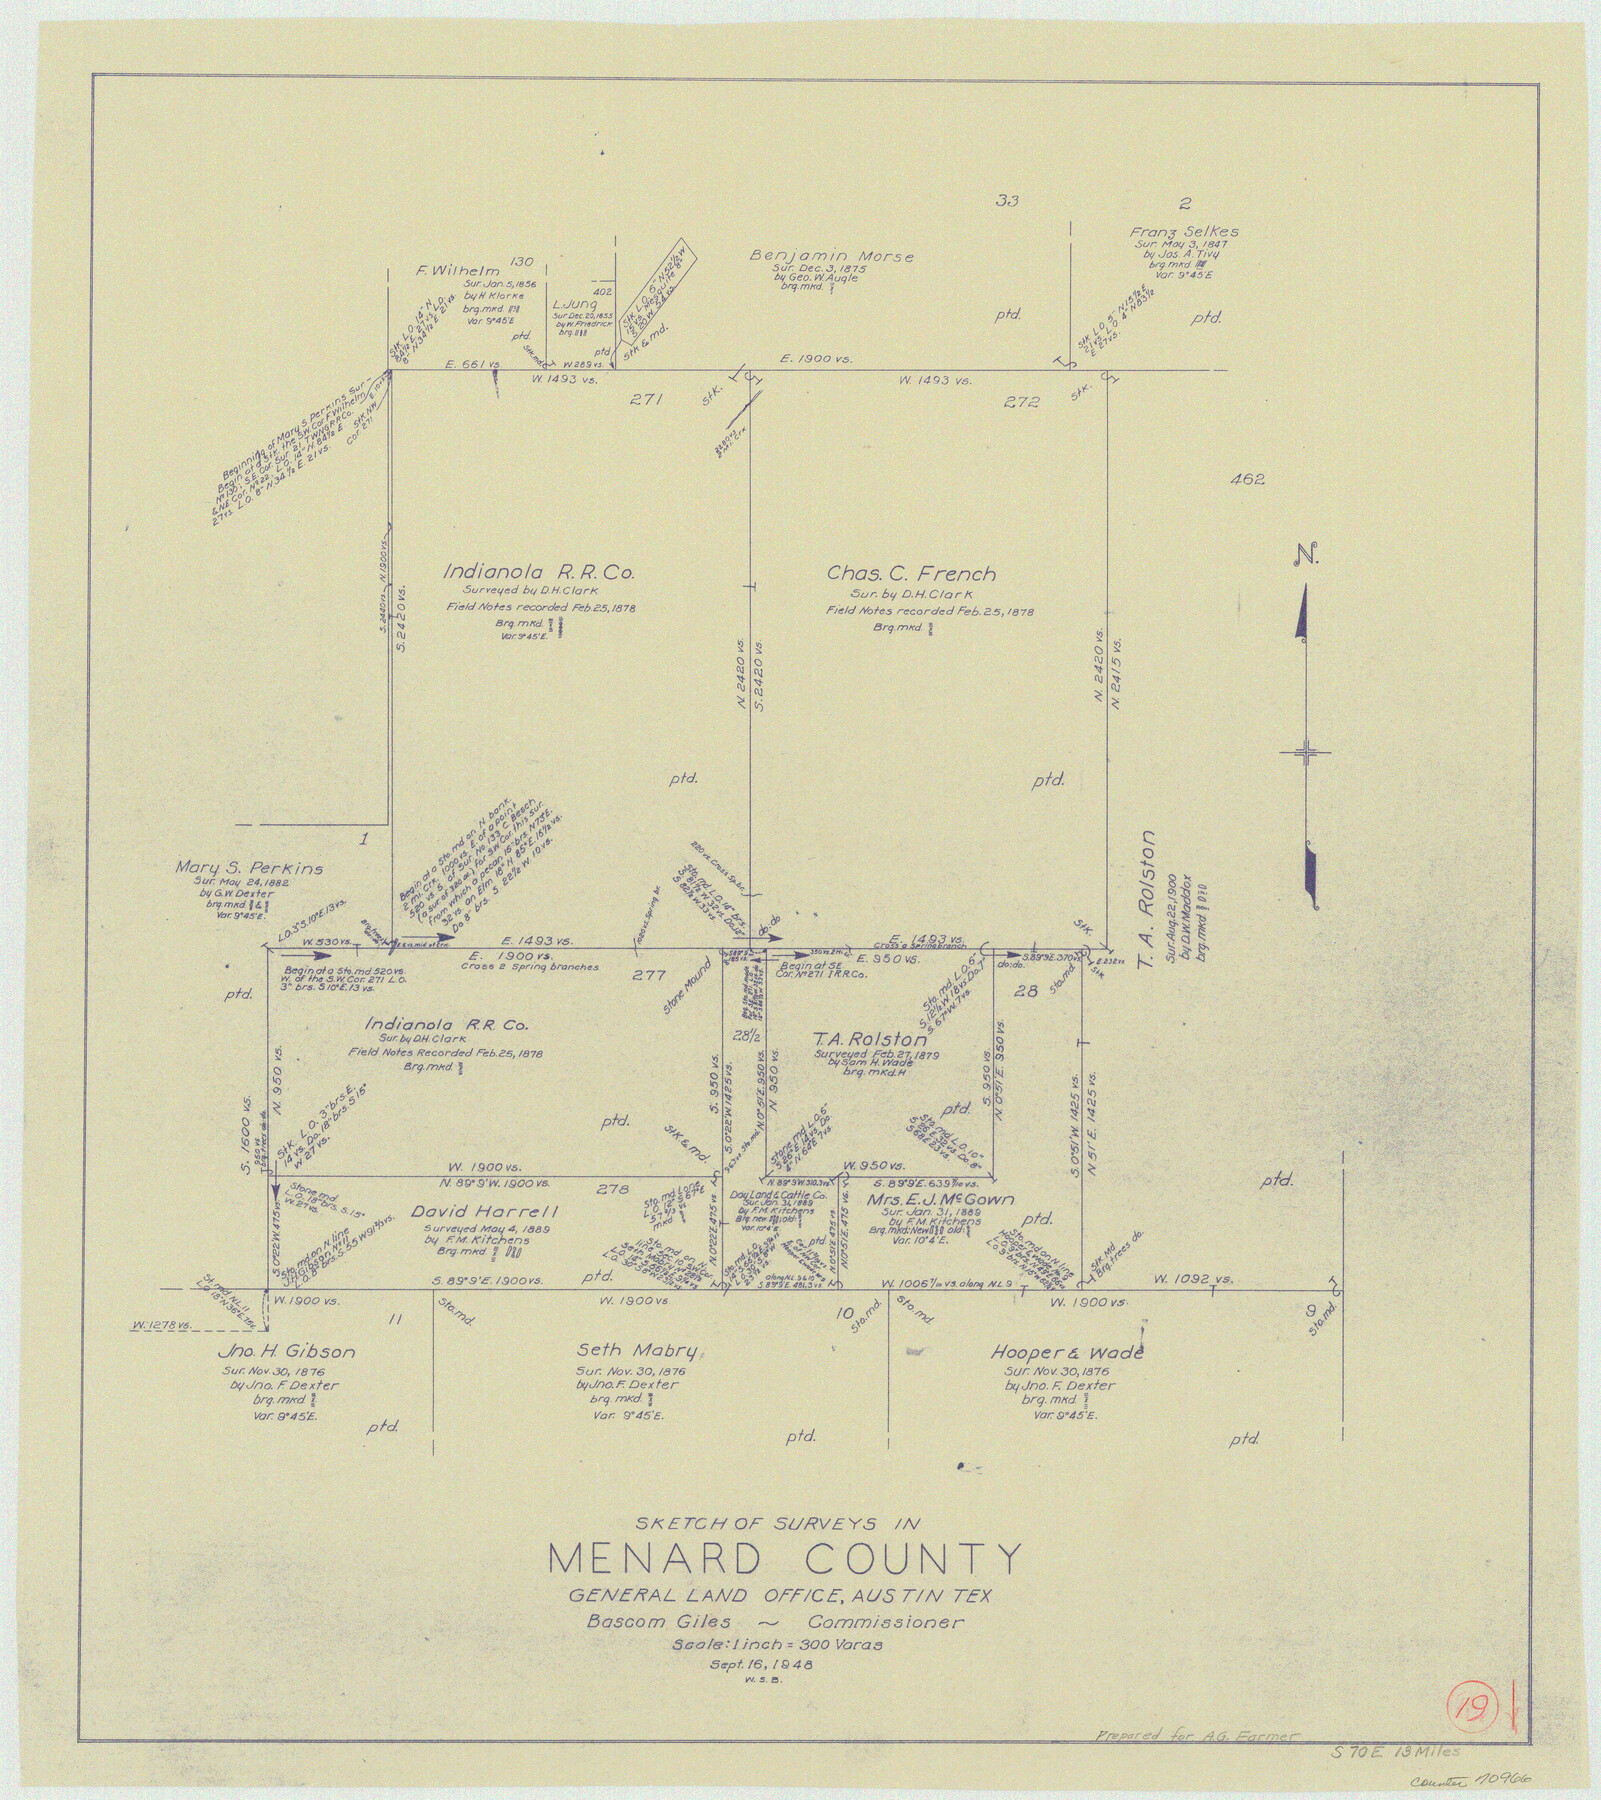 70966, Menard County Working Sketch 19, General Map Collection